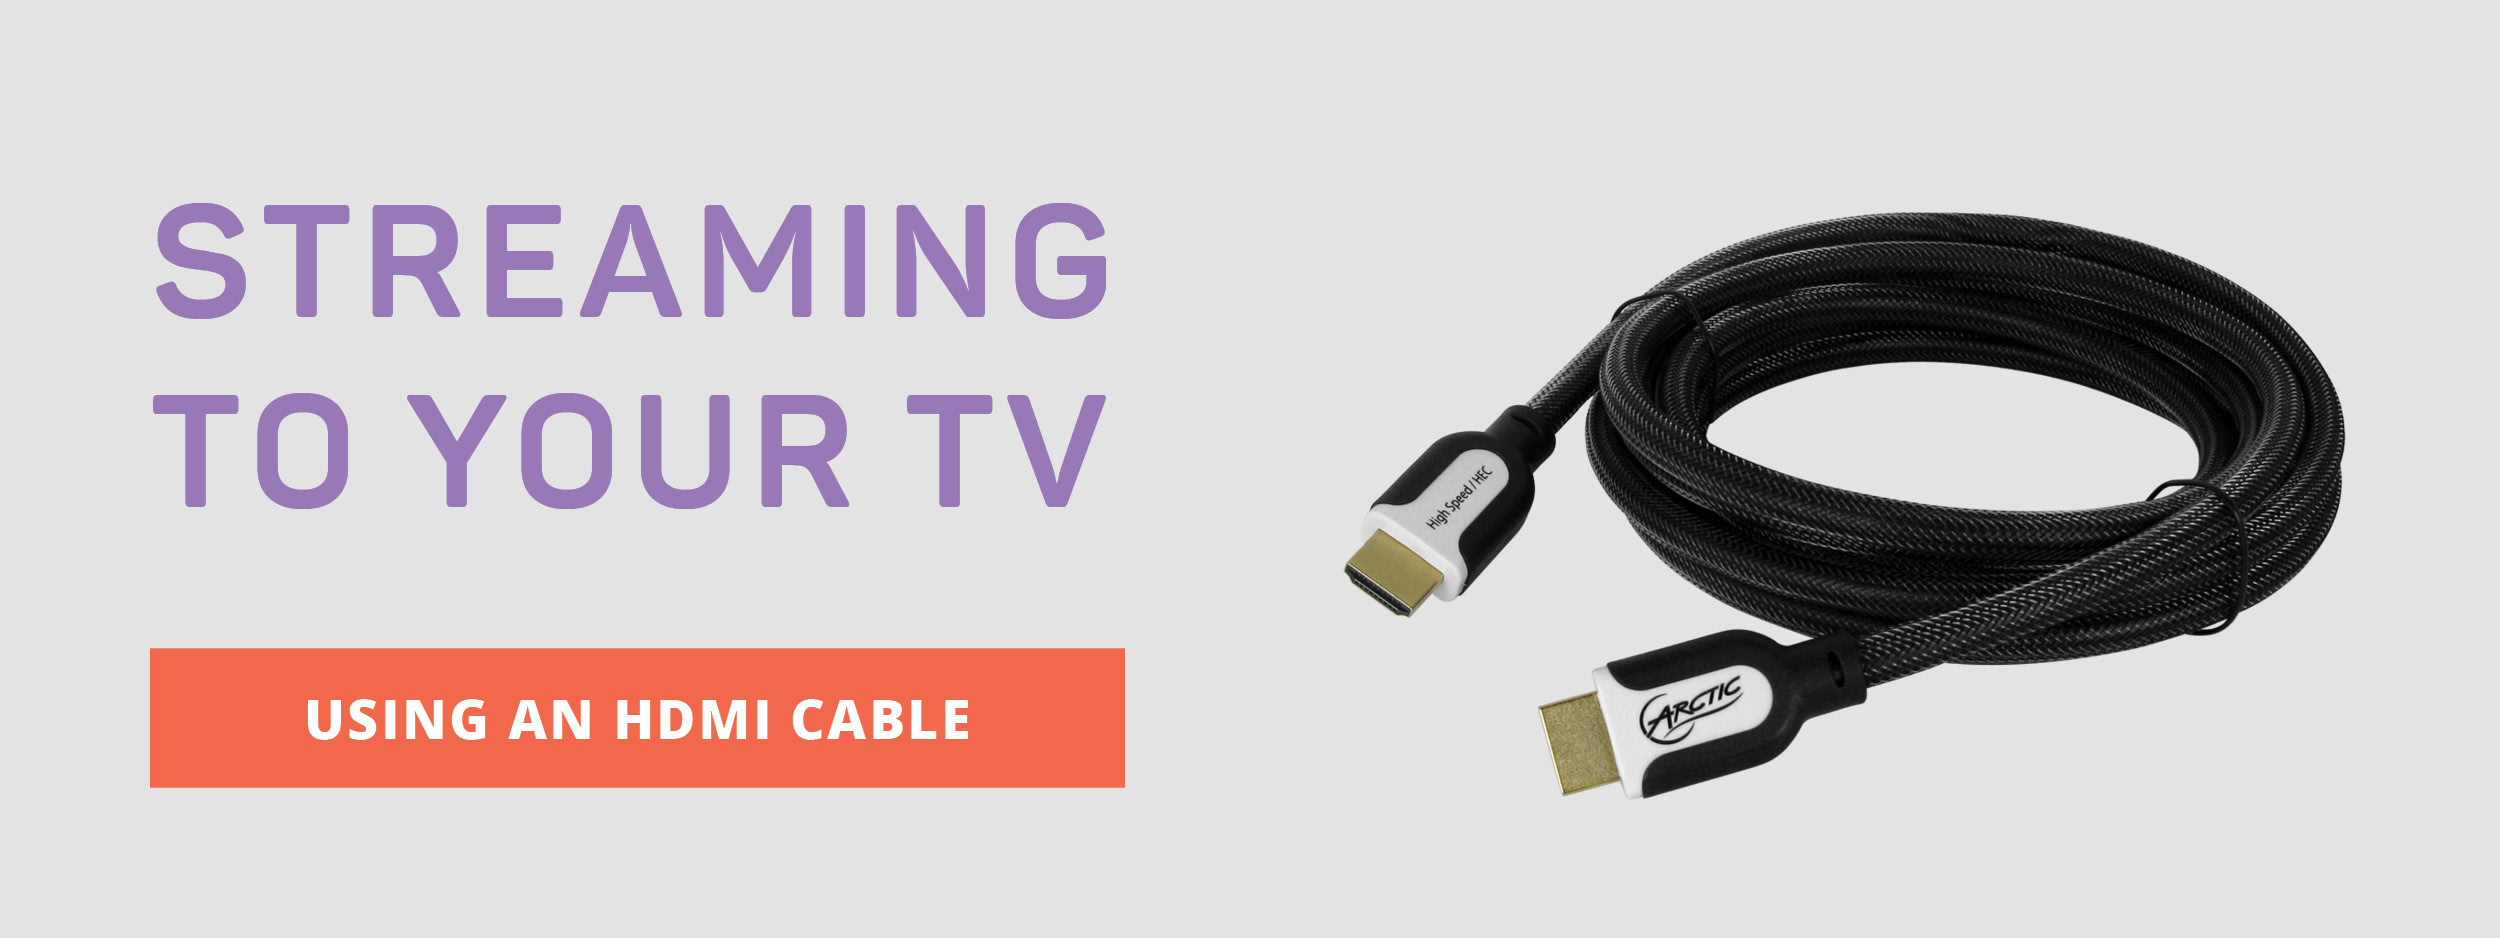 Stream using an HDMI Cable